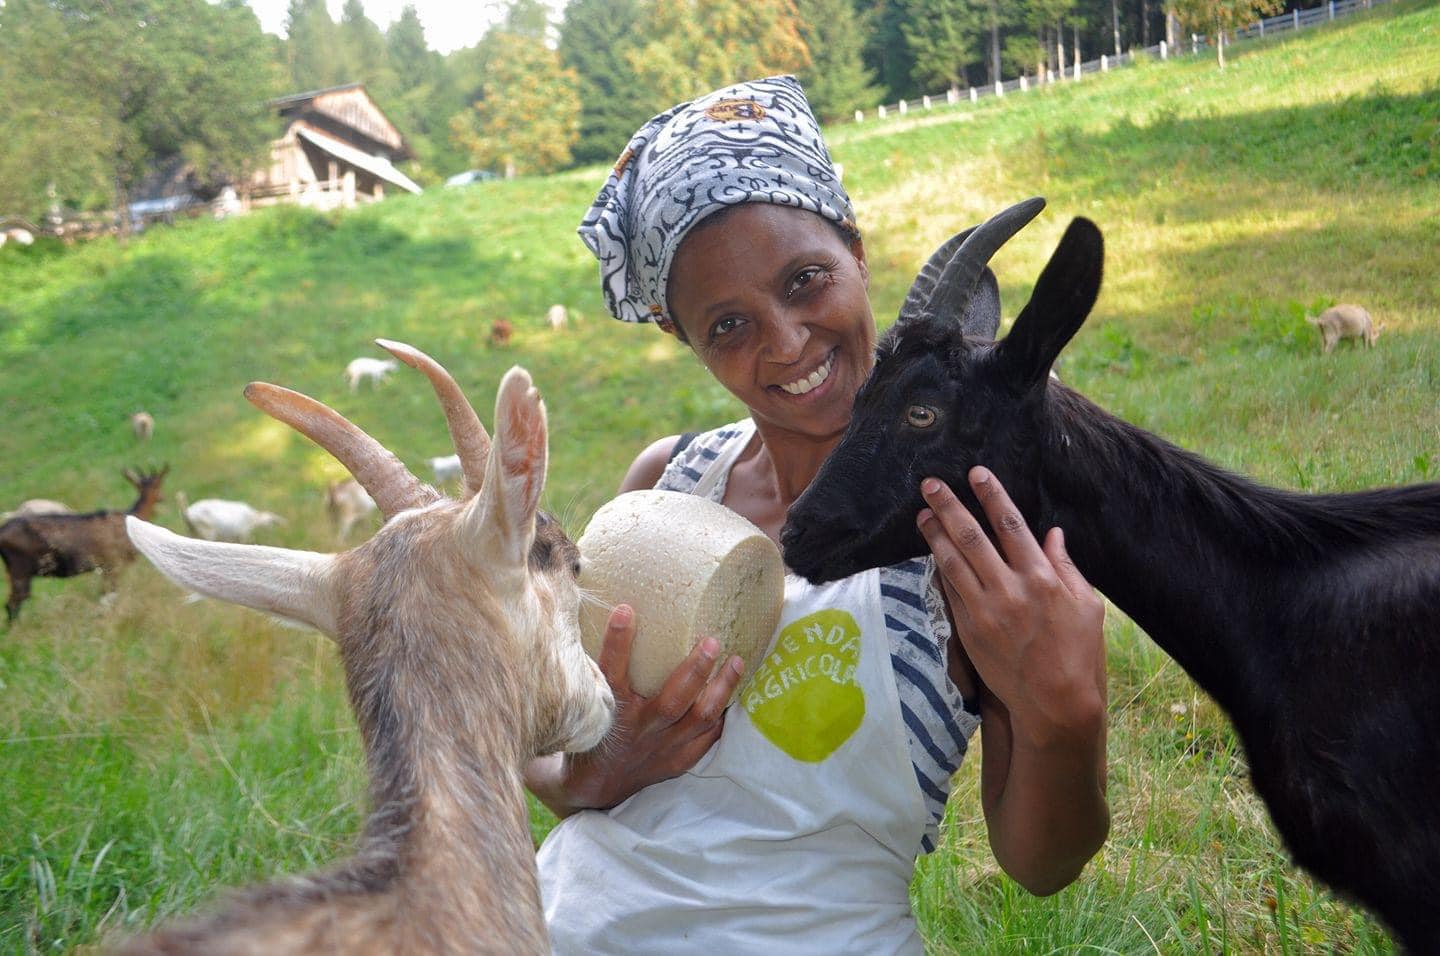 Ethiopian Entrepreneur Agitu Killed in Italy. Her staff admitted to the murder